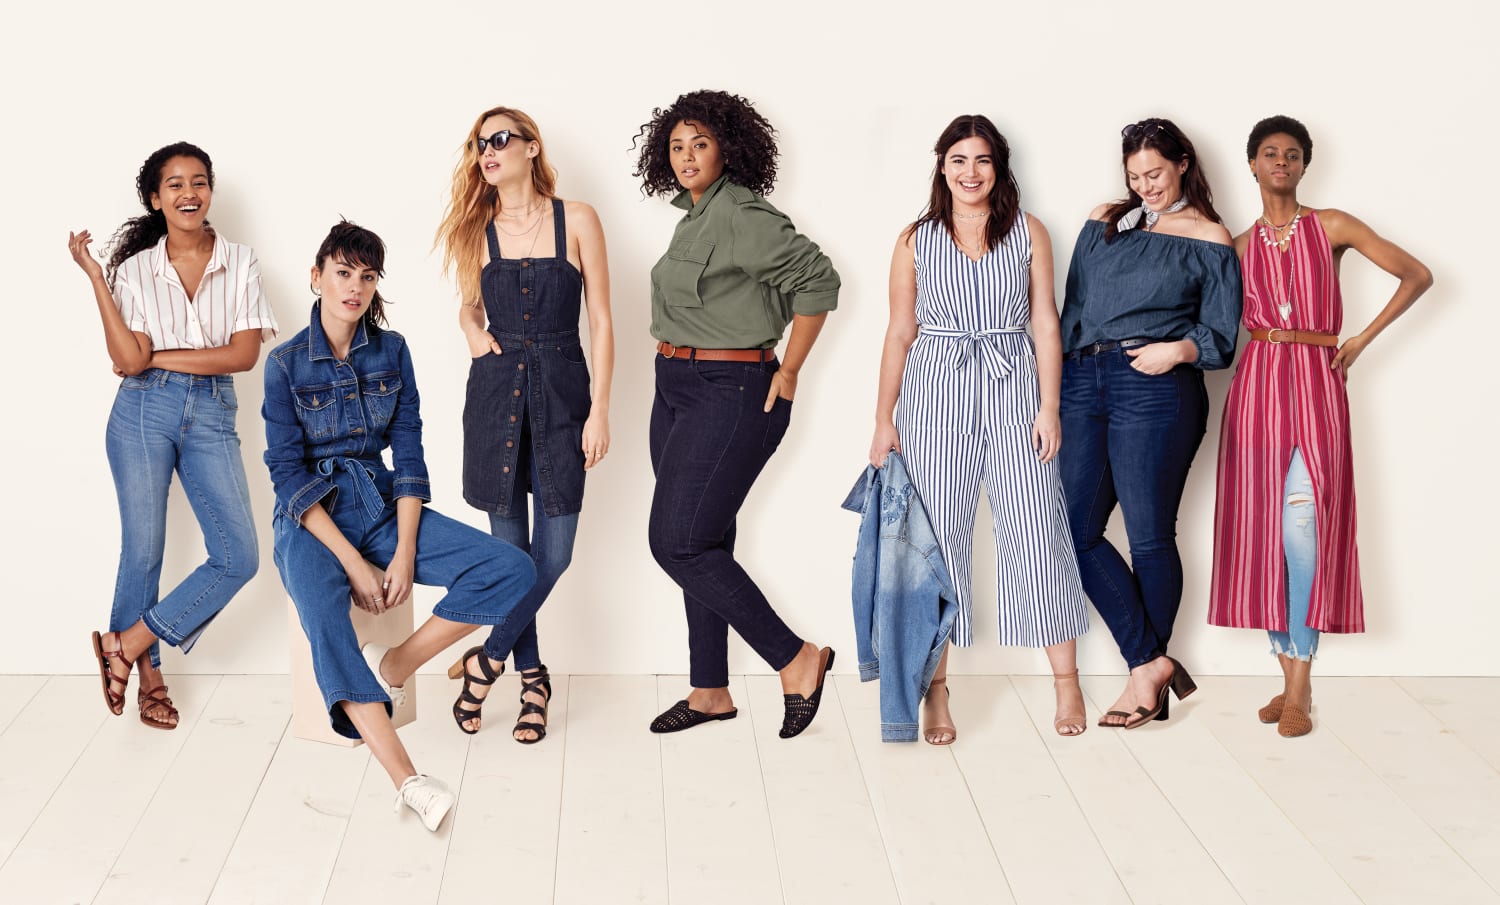 Target launches new a denim line called Universal Thread